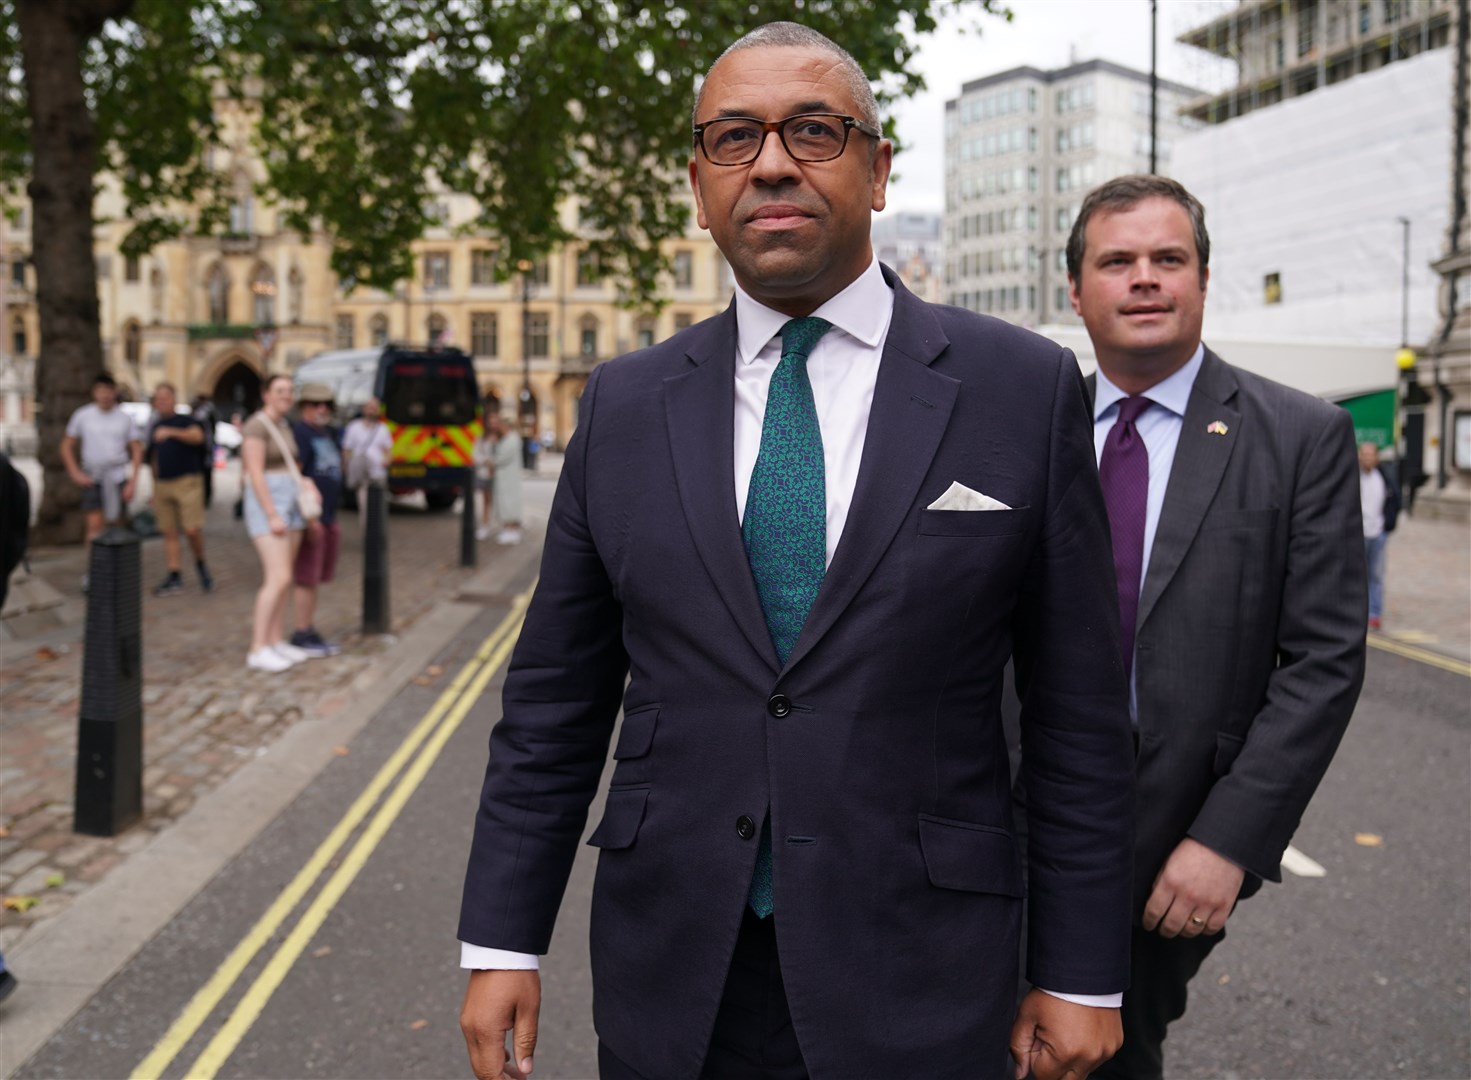 James Cleverly arrives at the Queen Elizabeth II Centre in London for the announcement of the new Conservative Party leader (Kirsty O’Connor/PA)